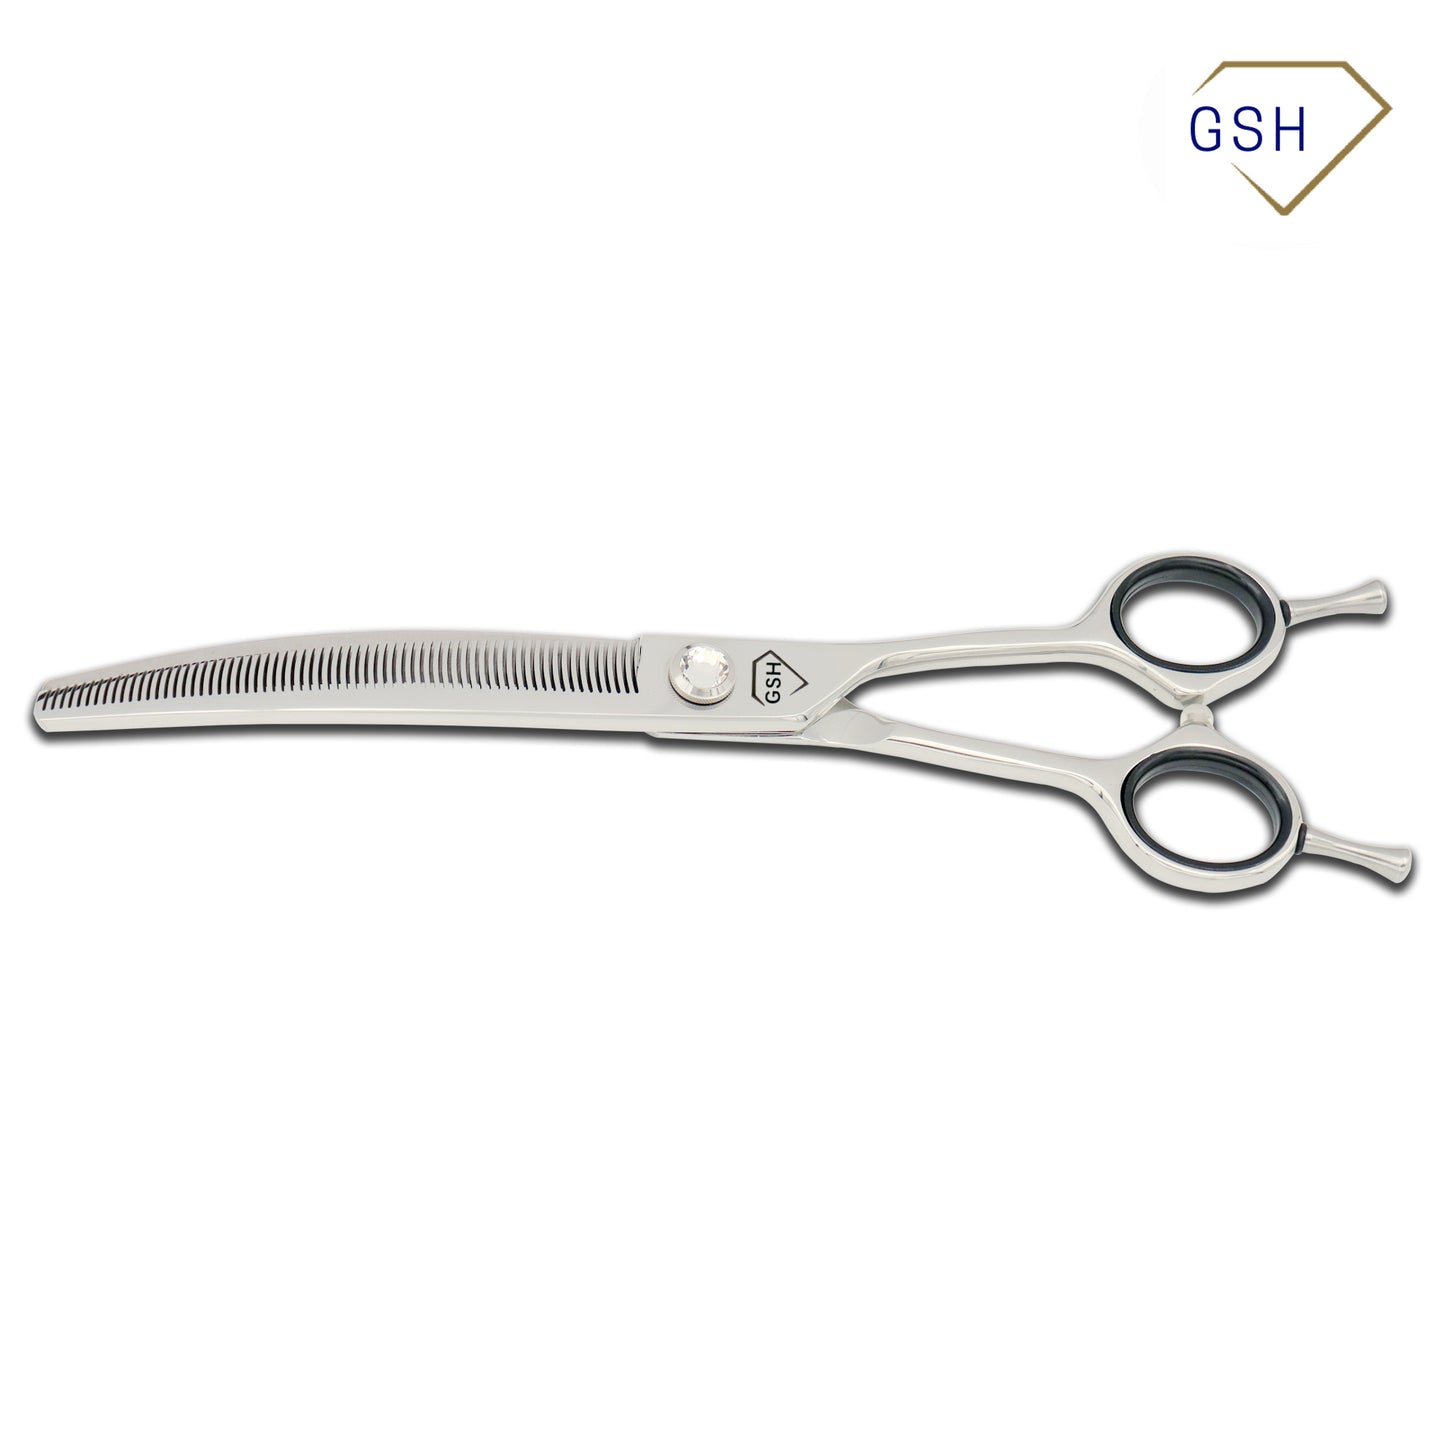 GSH DIAMOND 7.5in 66 tooth curve thinner